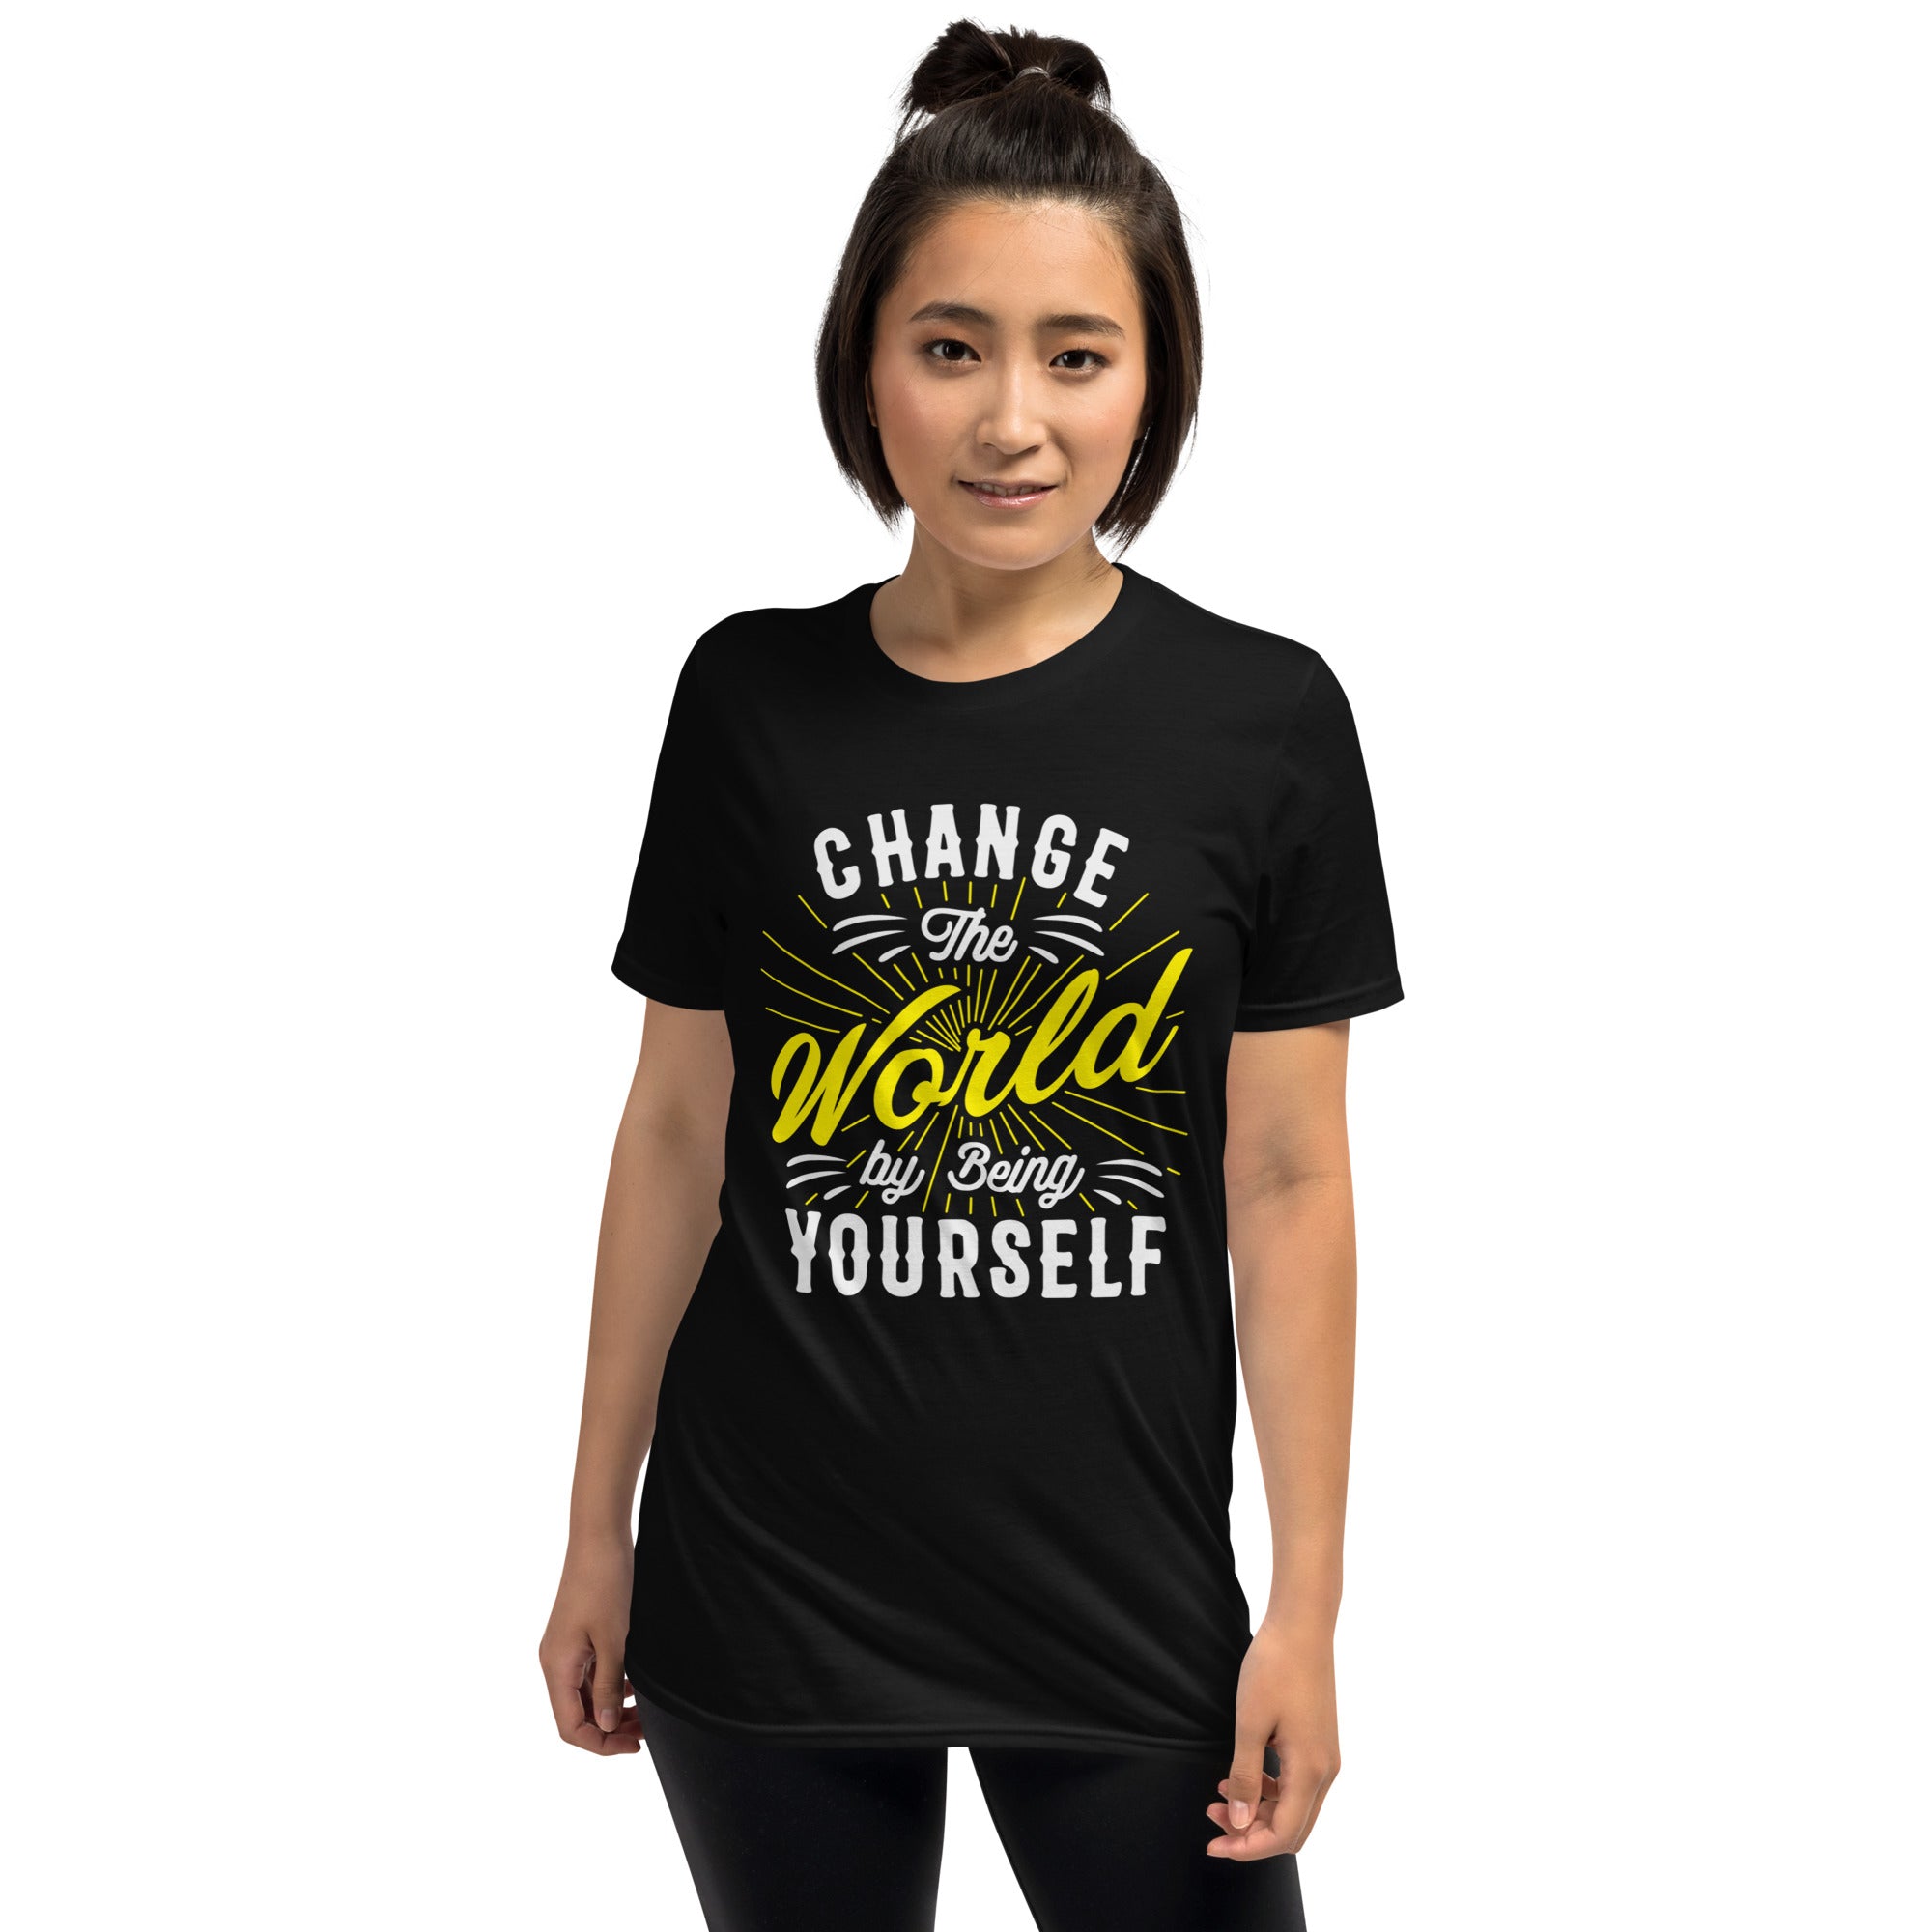 Change The World By Being Yourself - Short-Sleeve Unisex T-Shirt